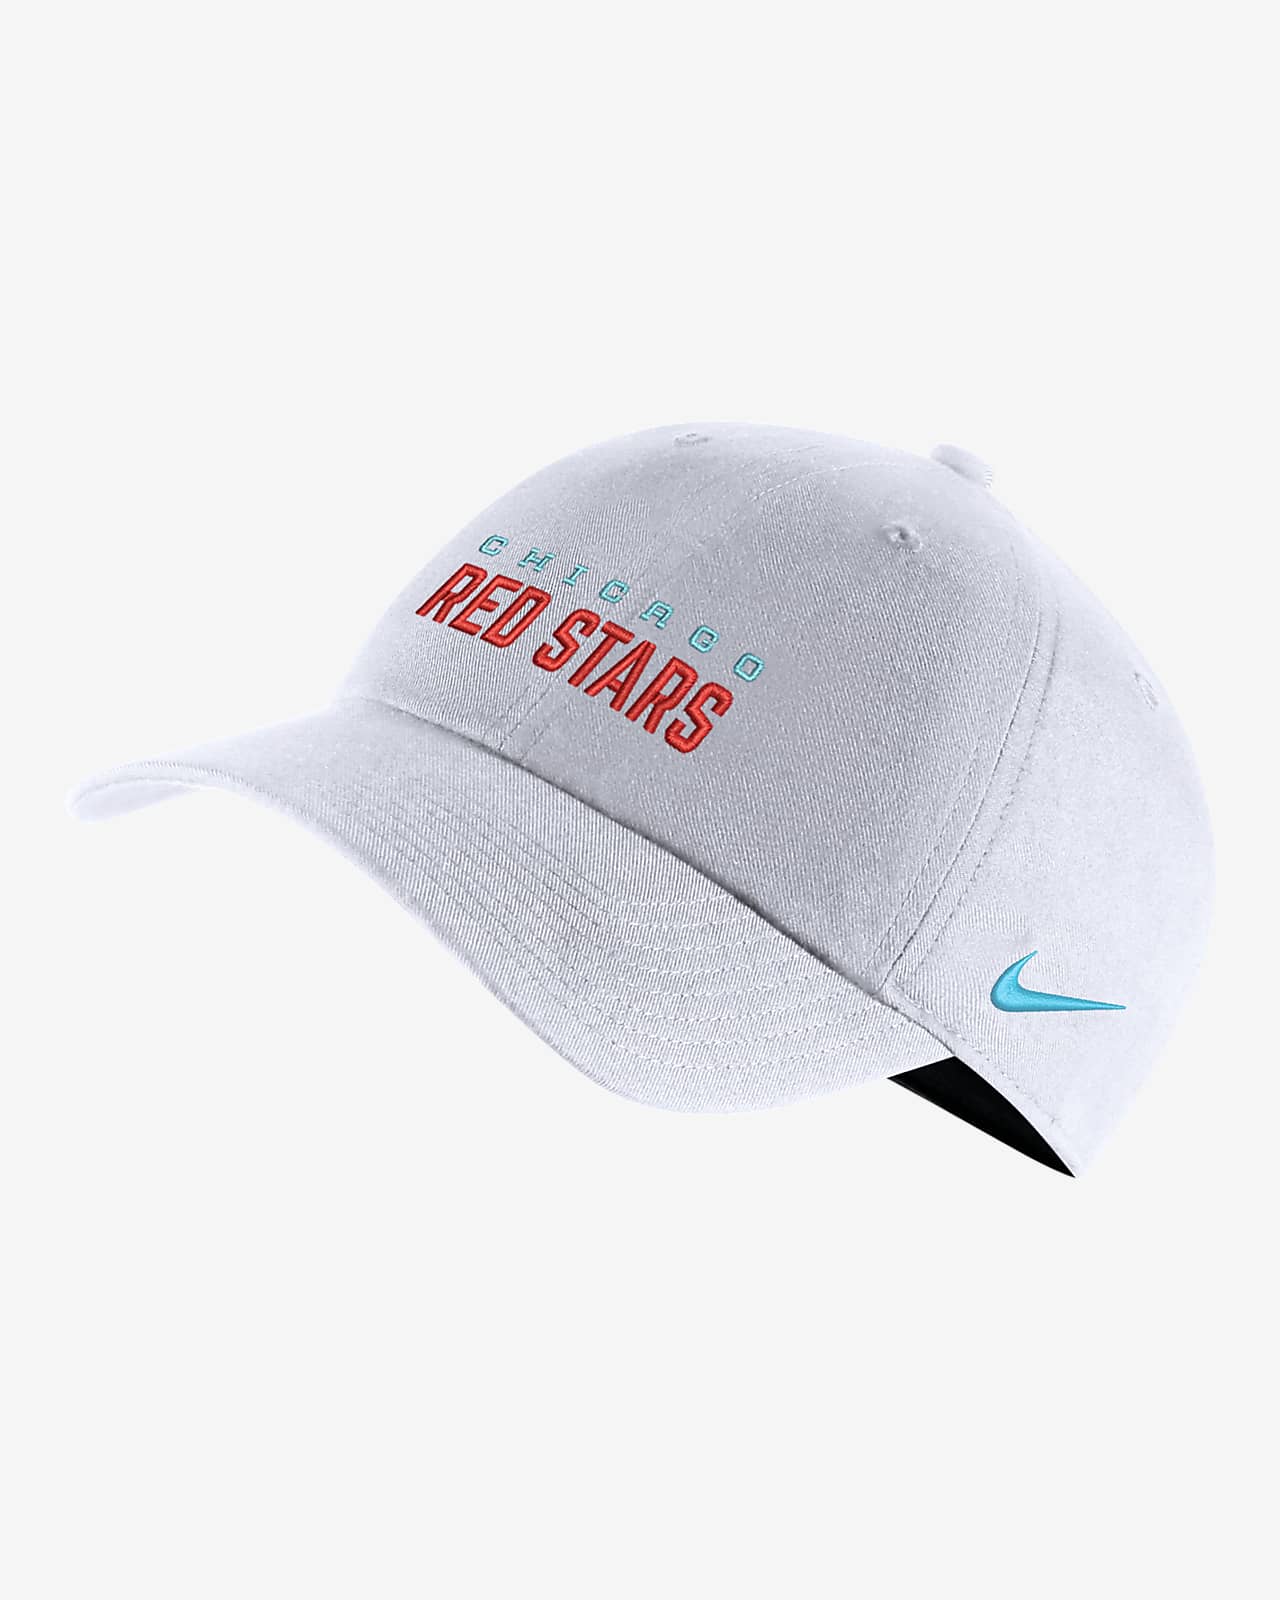 Chicago Red Stars Heritage86 Nike Soccer Hat